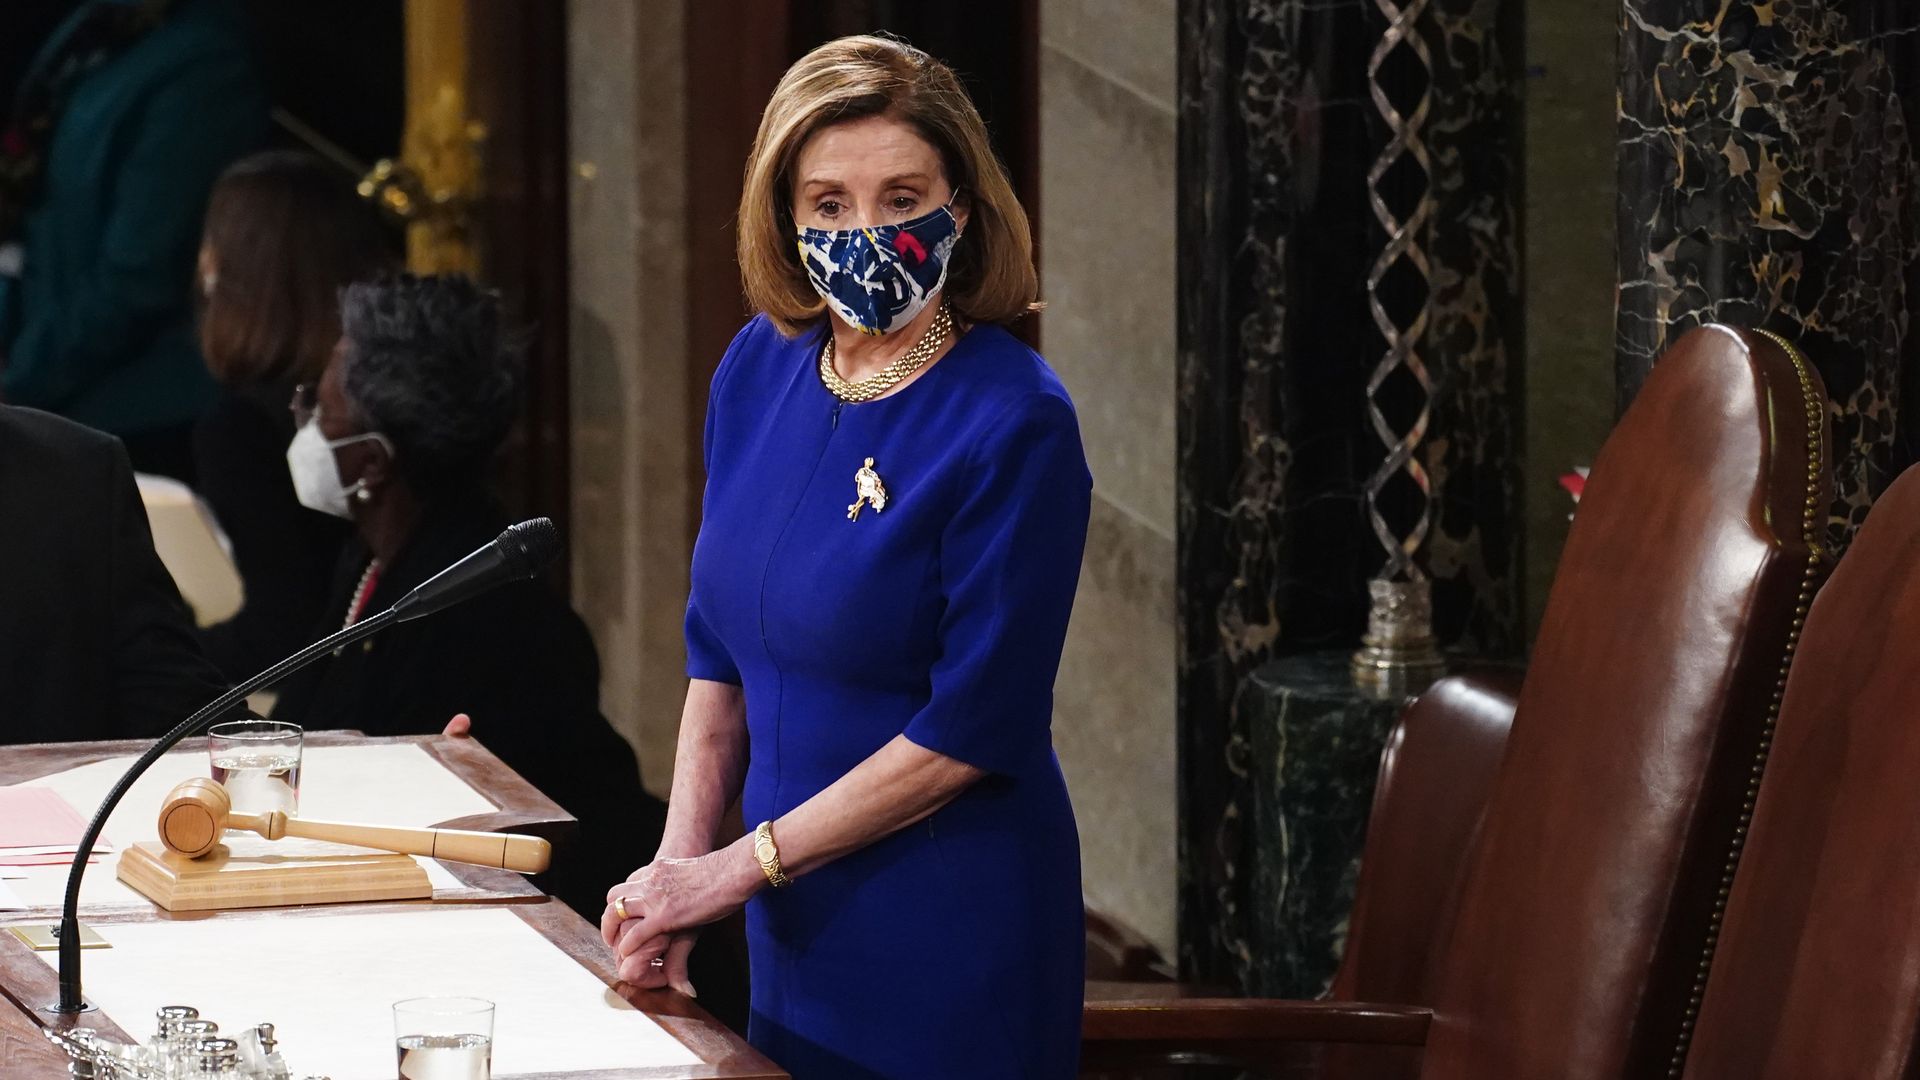 Speaker of the House Nancy Pelosi presiding over a a joint session of Congress on Jan. 6.